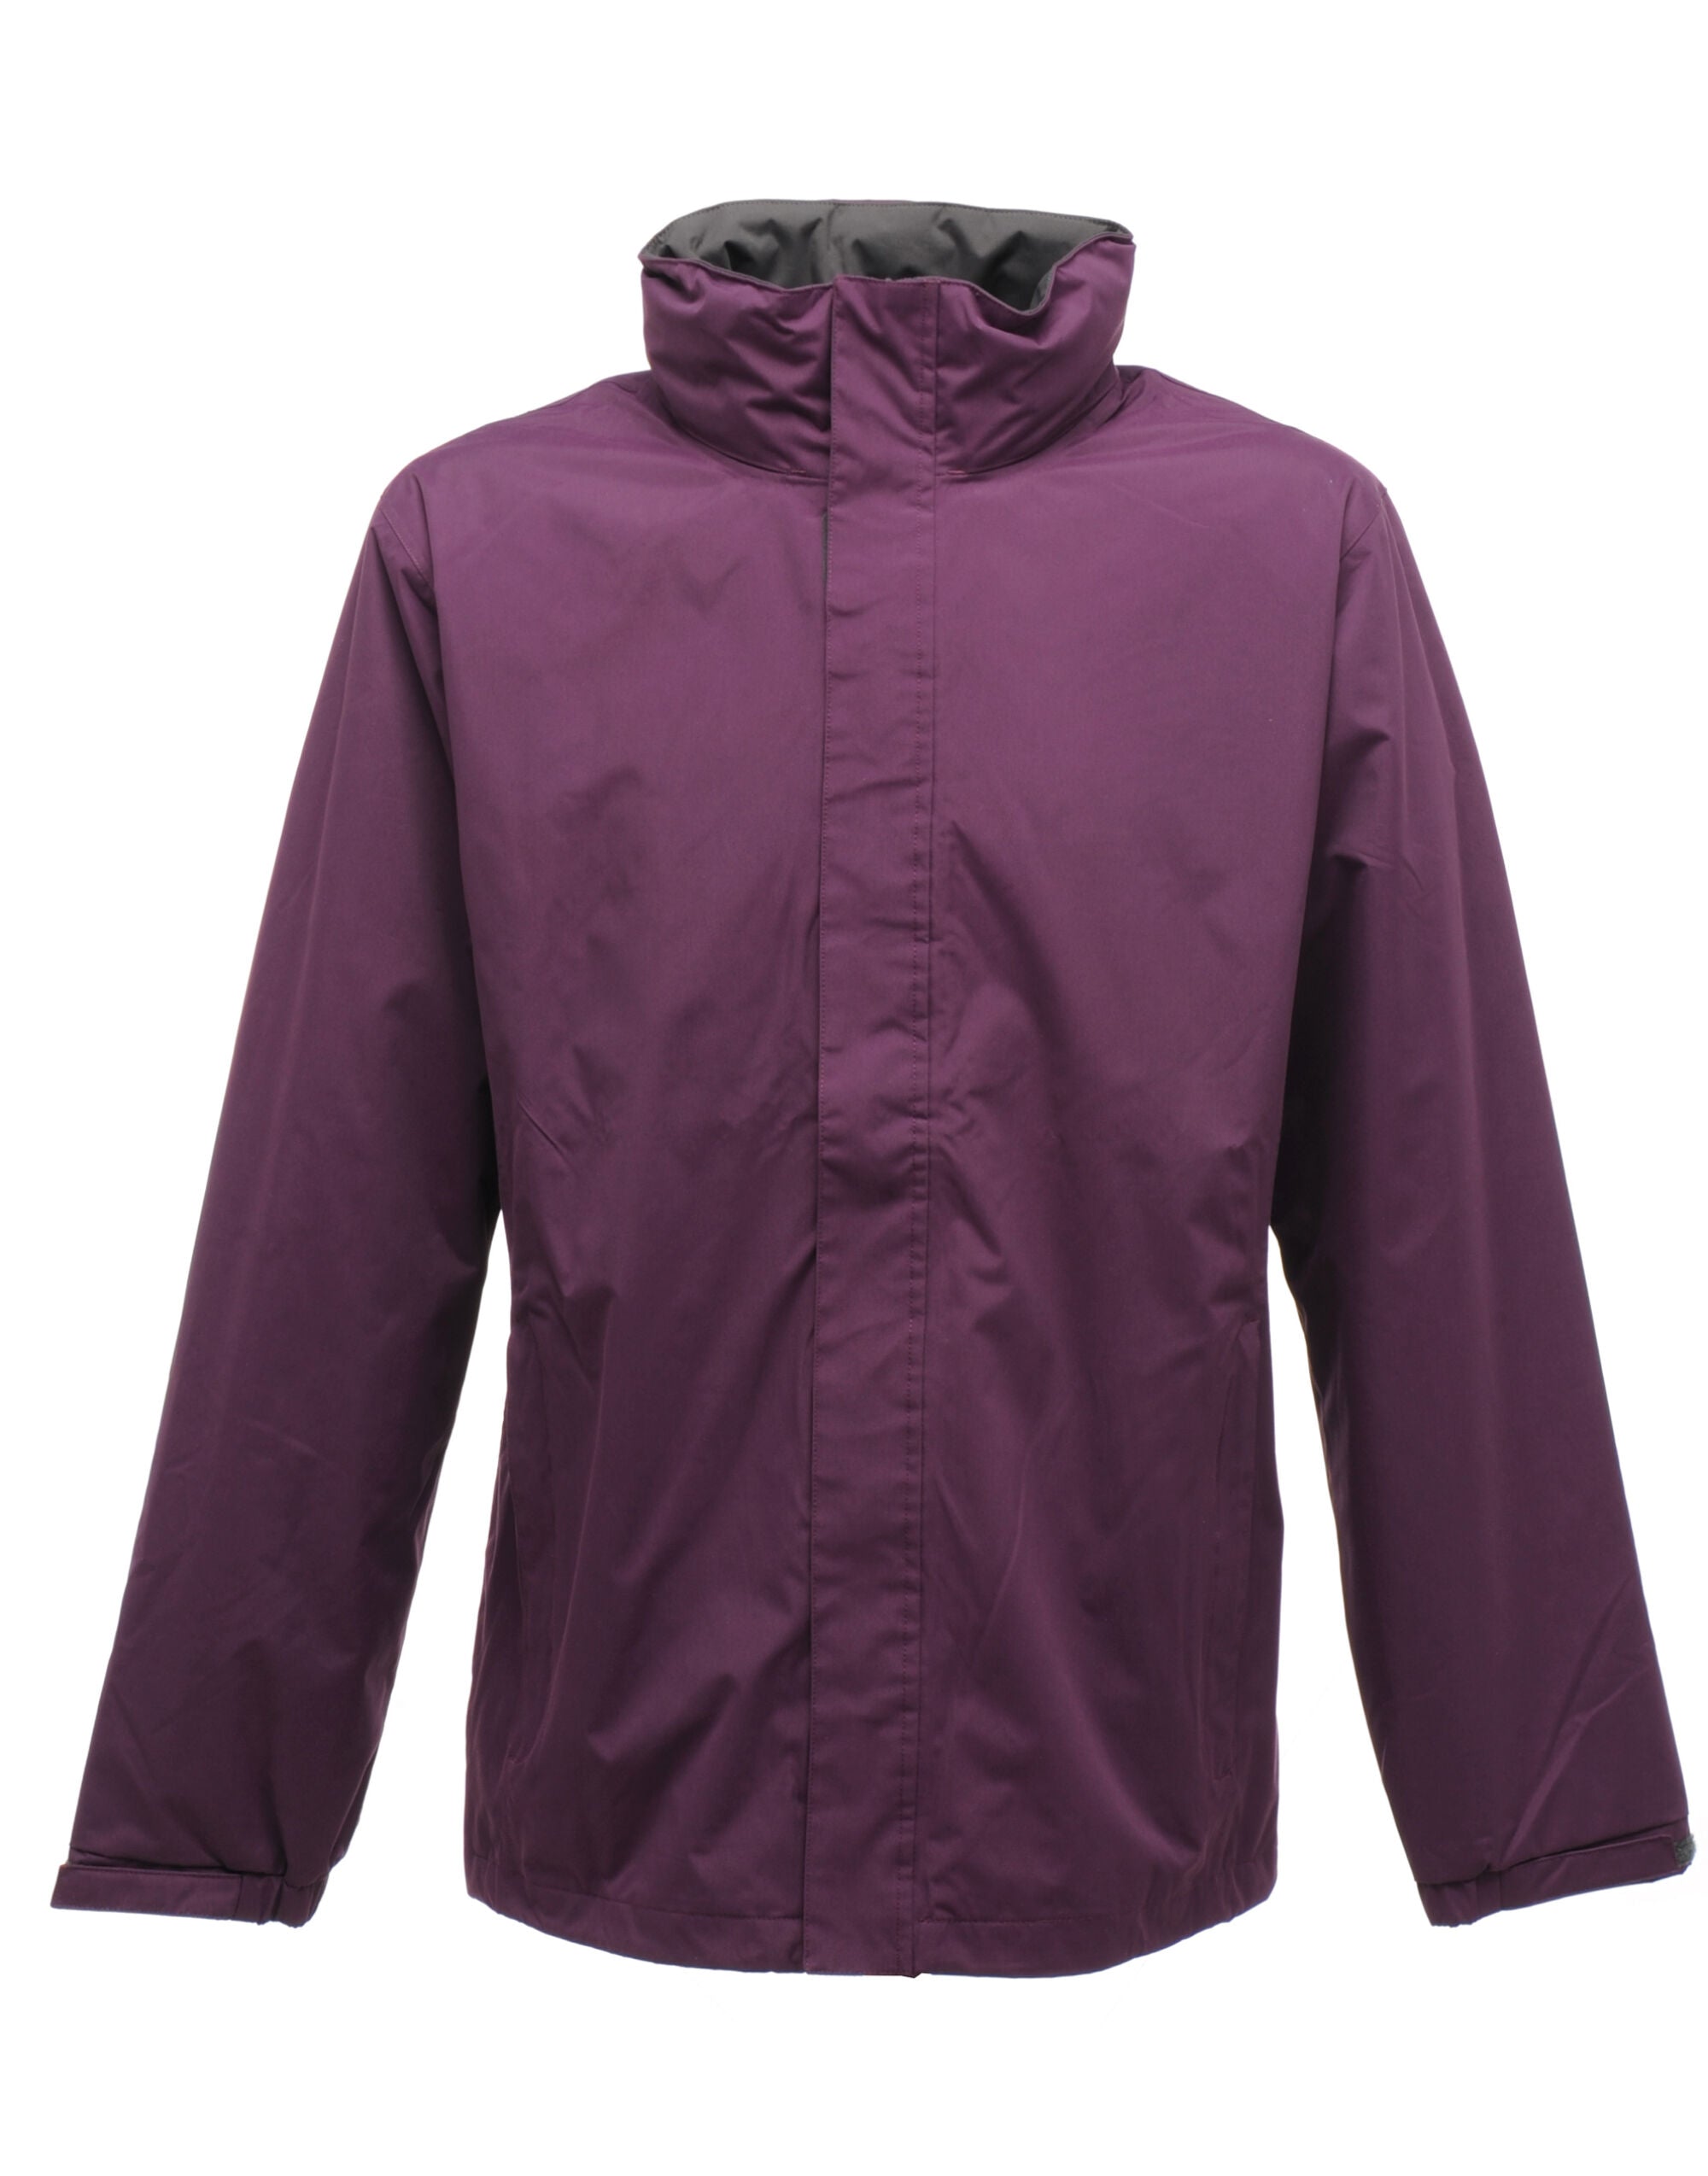 Regatta Professional Ardmore Waterproof Shell Jacket Hydrafort 5000 coated peached Polyester (TRW461)